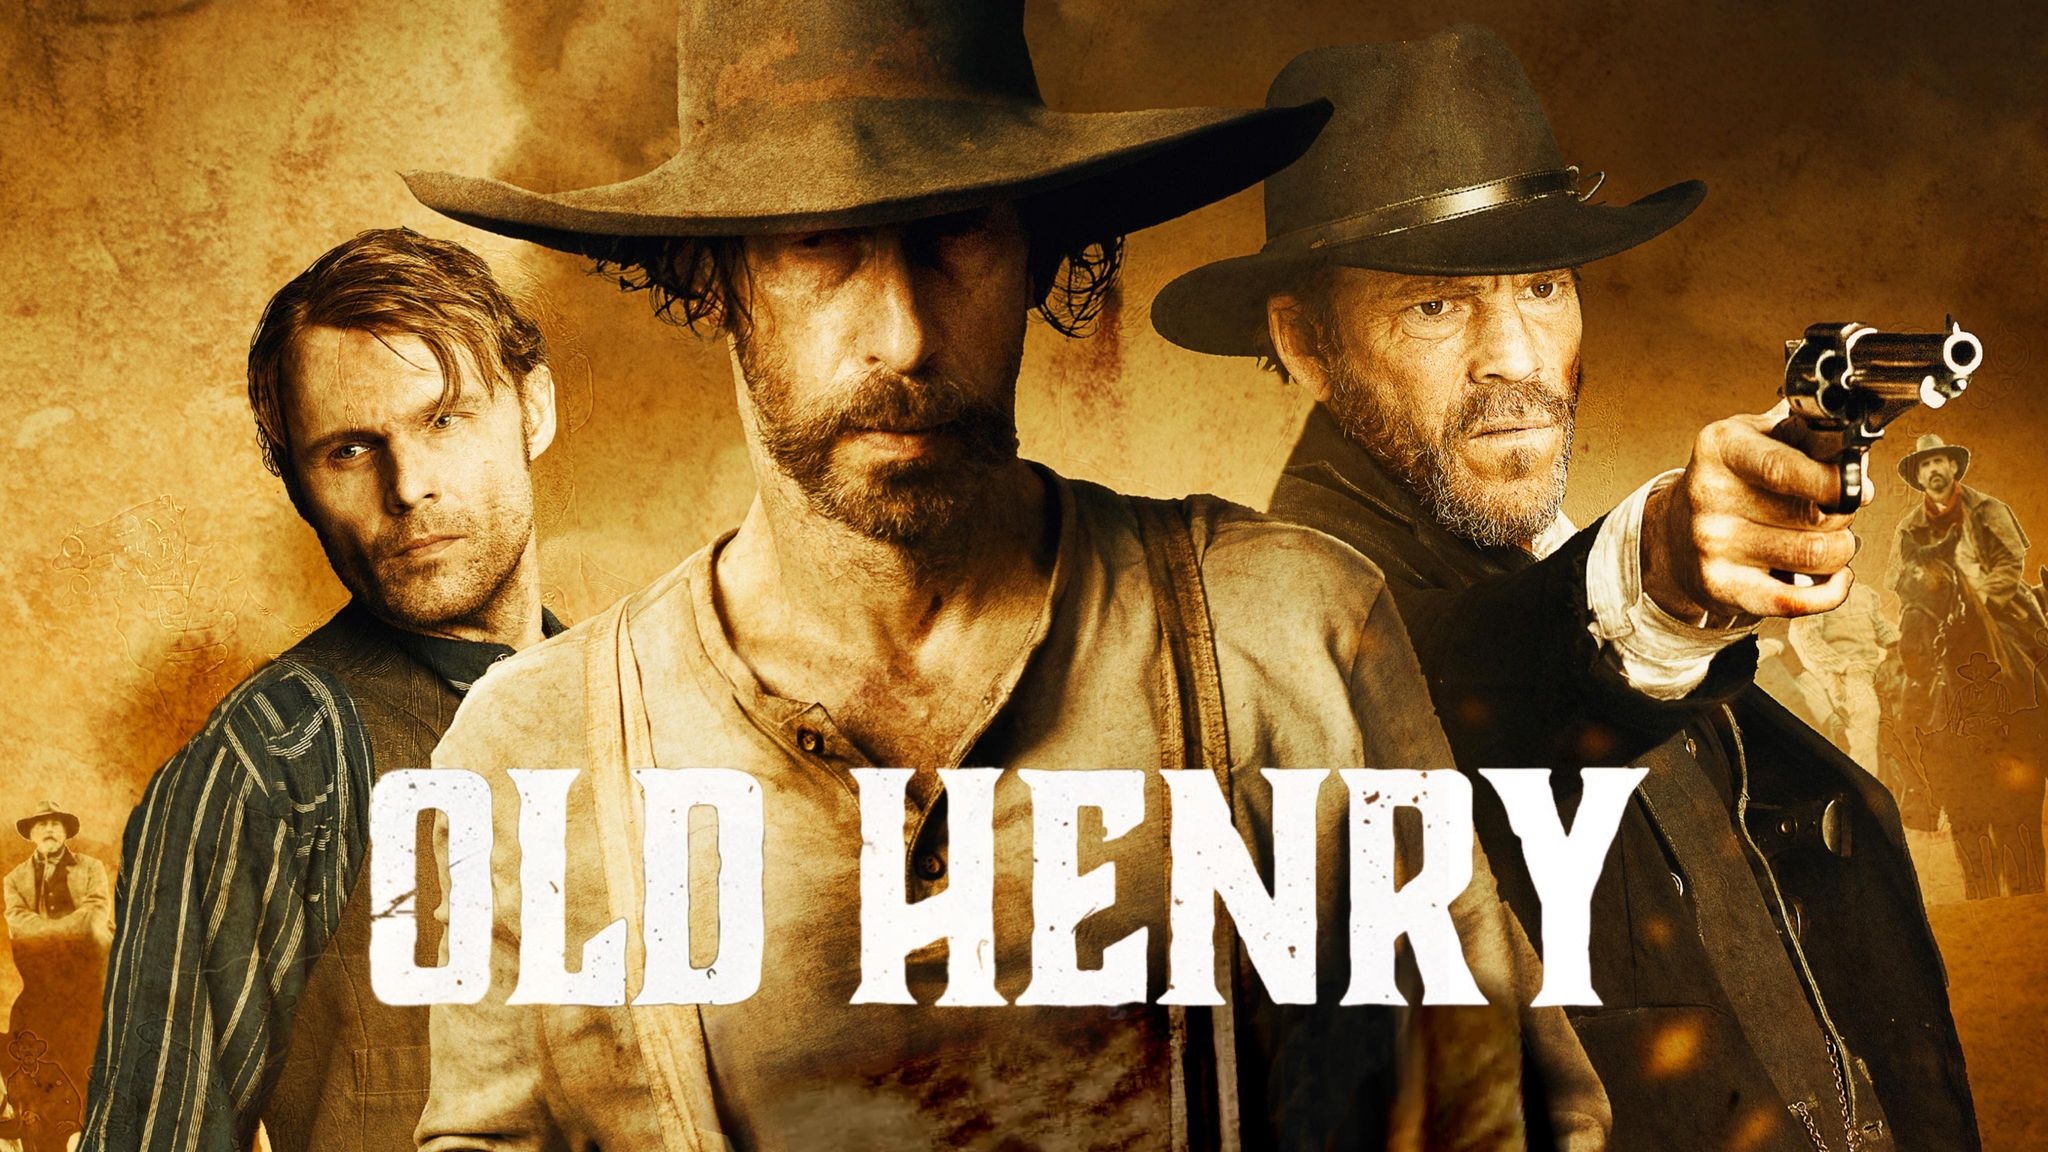 Old Henry movie, Western movie reviews, Mania's overview, Unforgettable cinematic experience, 2050x1160 HD Desktop